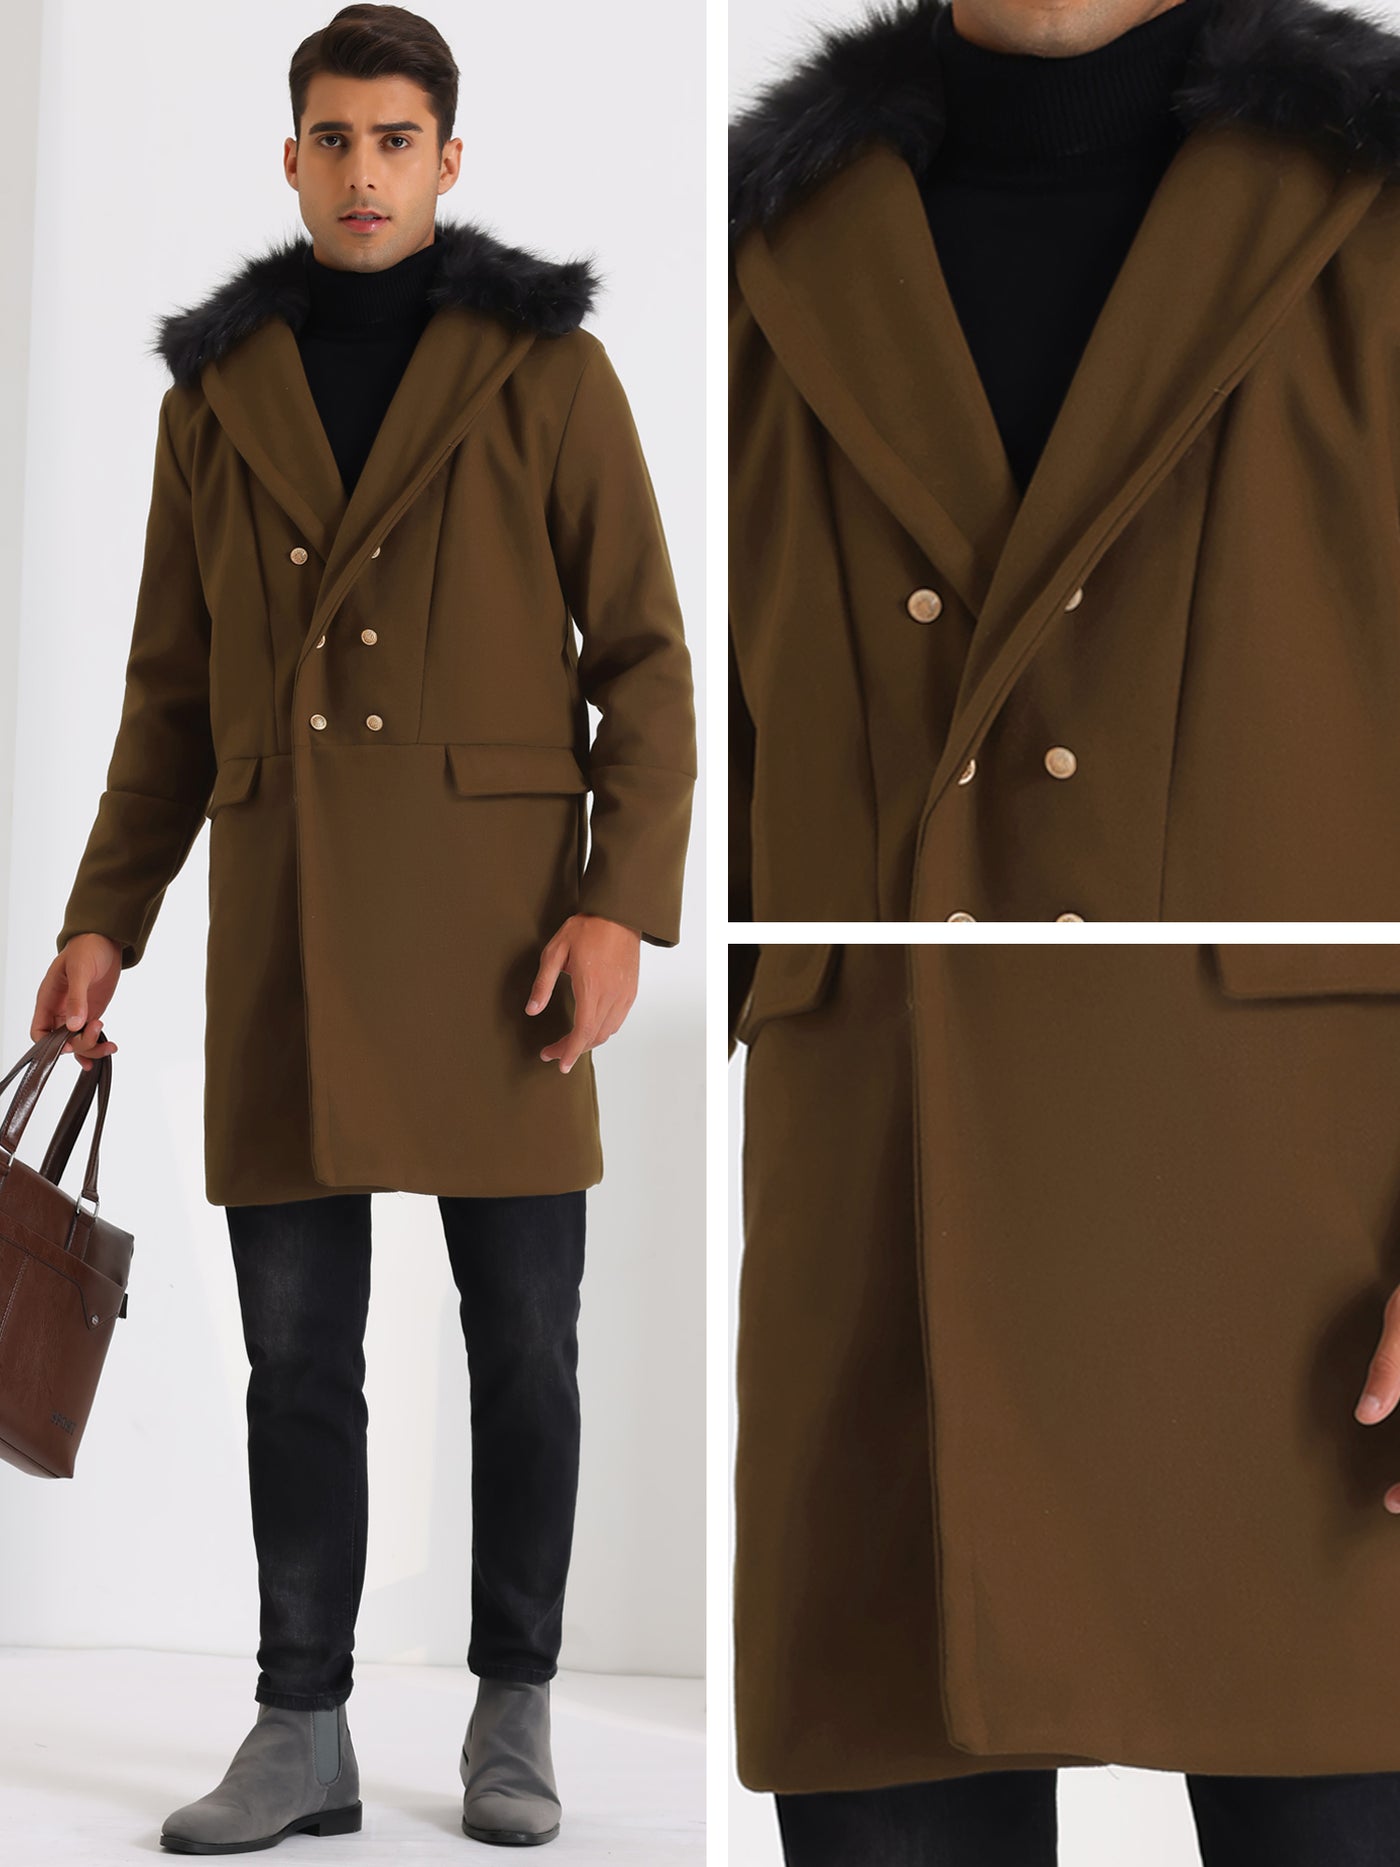 Bublédon Winter Overcoat for Men's Double Breasted with Detachable Faux Fur Collar Trench Coat